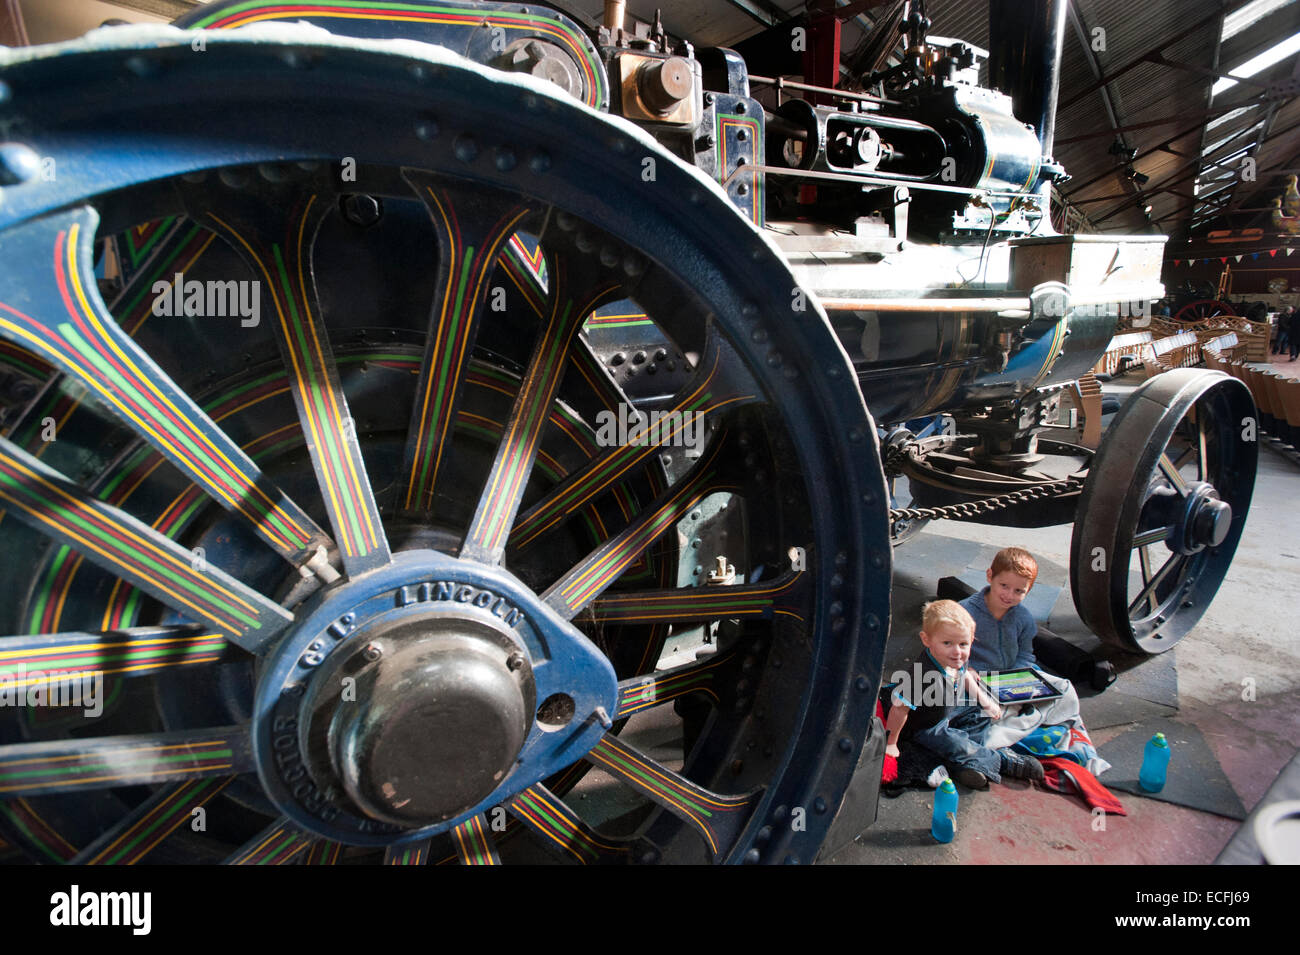 Two young brothers sit under the giant decorative wheels of Traction Engine 'The Champion' built by Ruston Proctor & Co of Lincoln at Strumpshaw Hall Steam Museum near Norwich, Norfolk. The traction engine was on display along with steam rollers, showmans engines and ploughing engines in the exhibition hall. Stock Photo